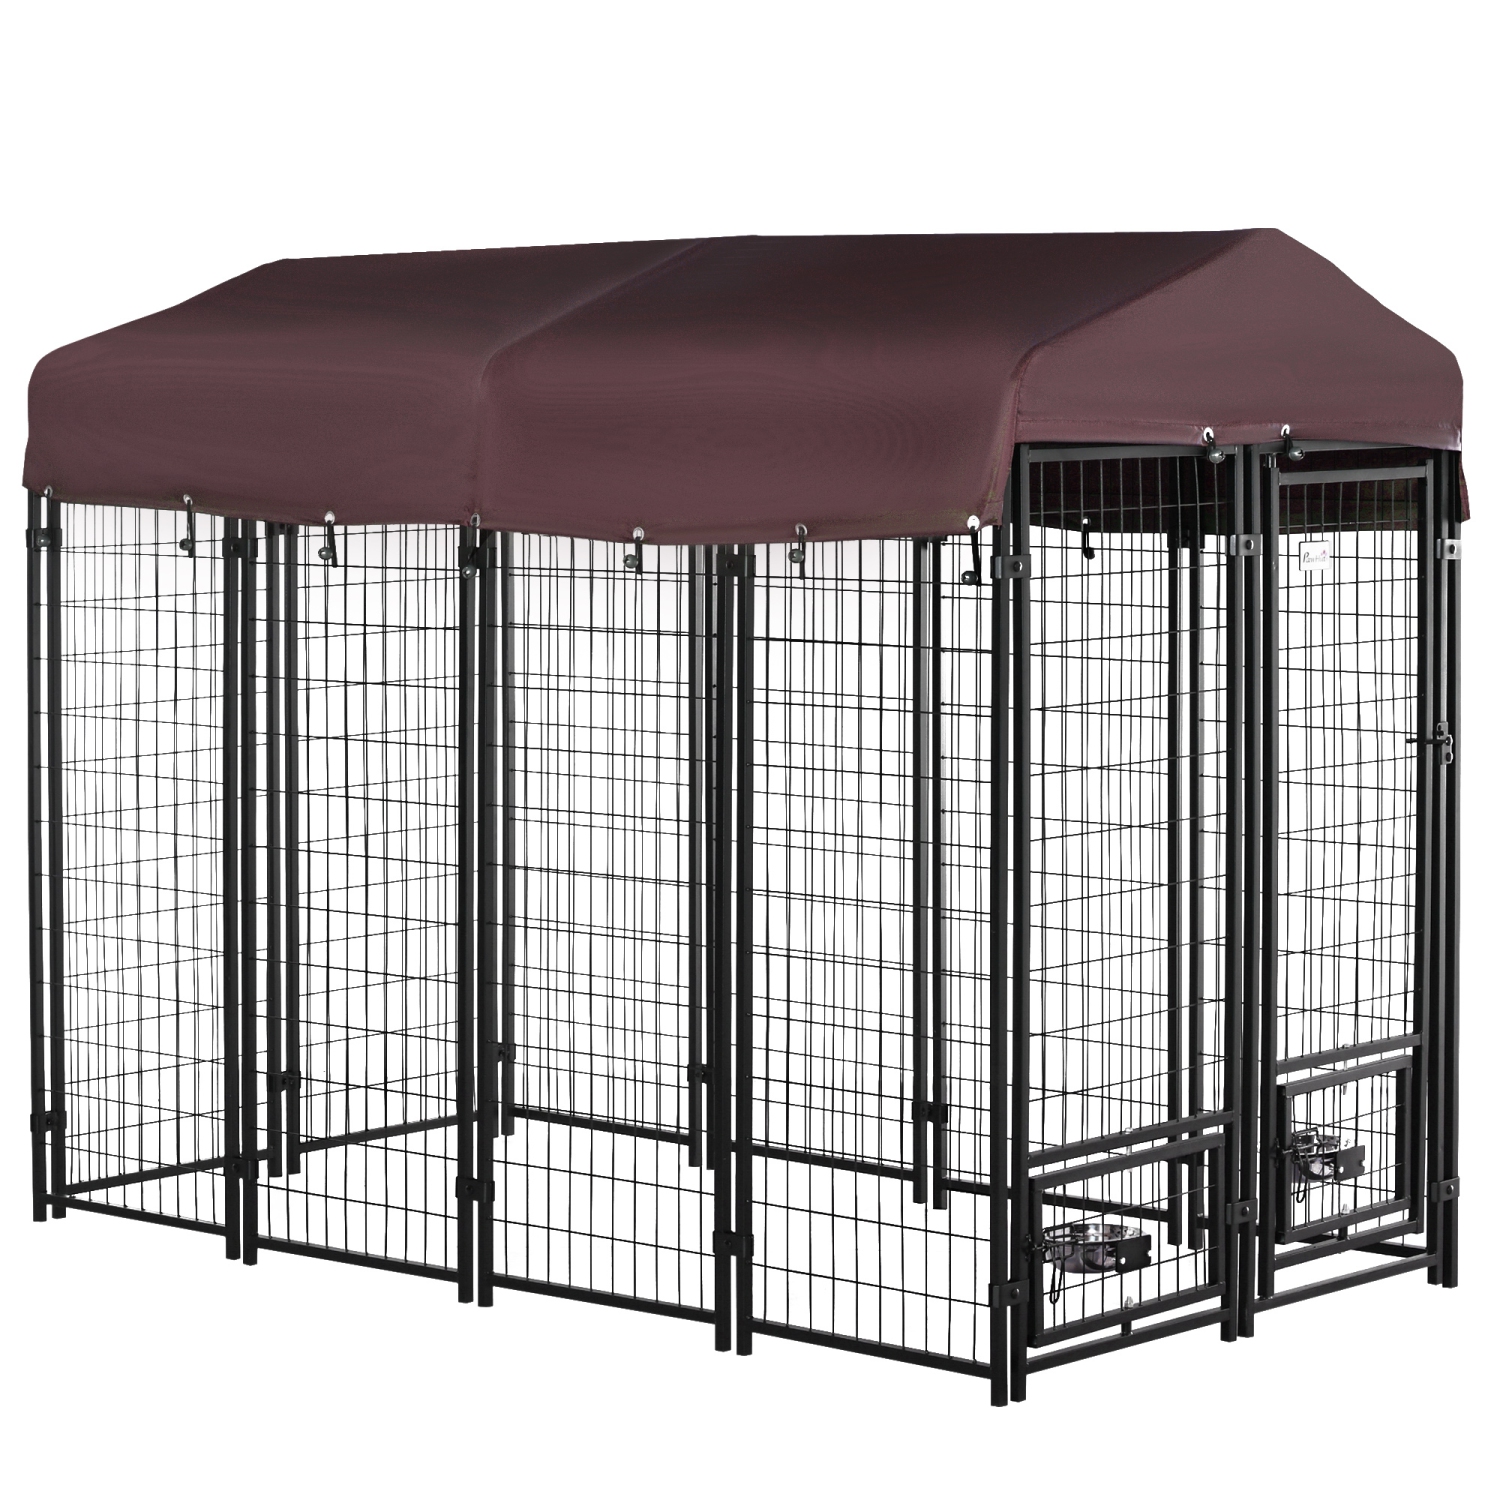 PawHut Outdoor Dog Kennel, Lockable Pet Playpen Crate, Welded Wire Steel Fence, with Water-, UV-Resistant Canopy, Rotating Bowl Holders, Door, 8ft x 4ft x 6ft, Red